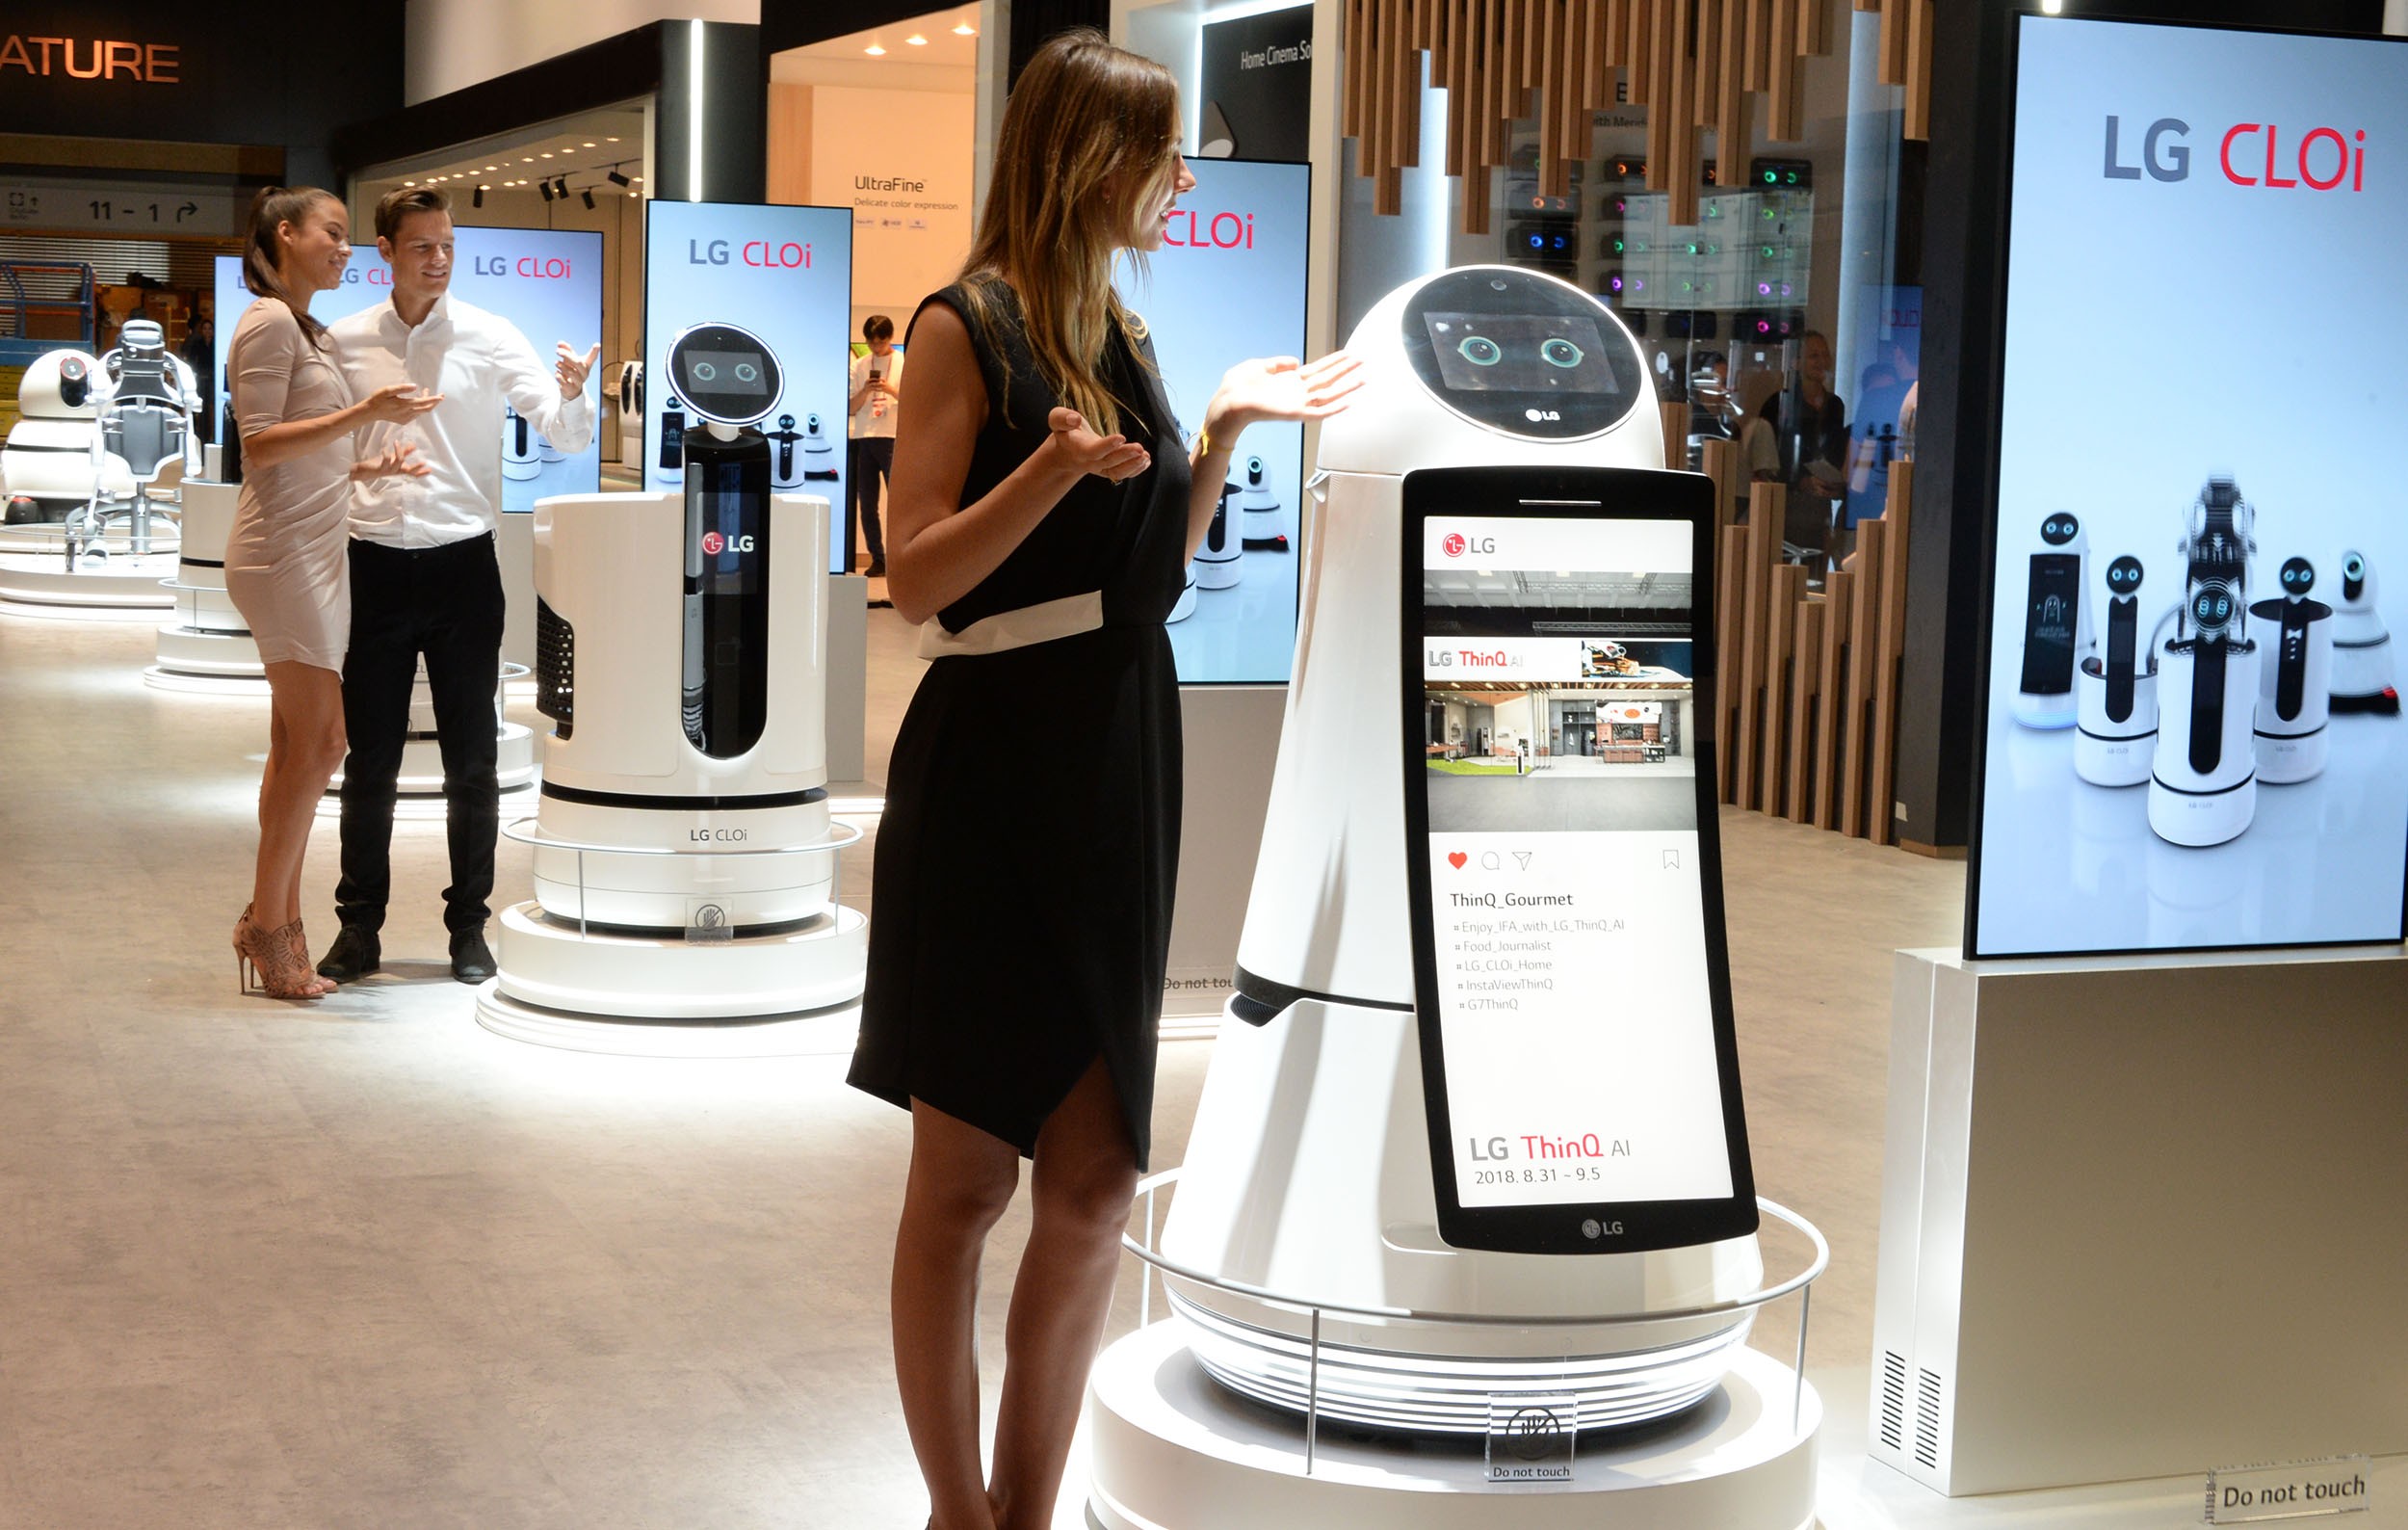 A model poses with the LG CLOi.